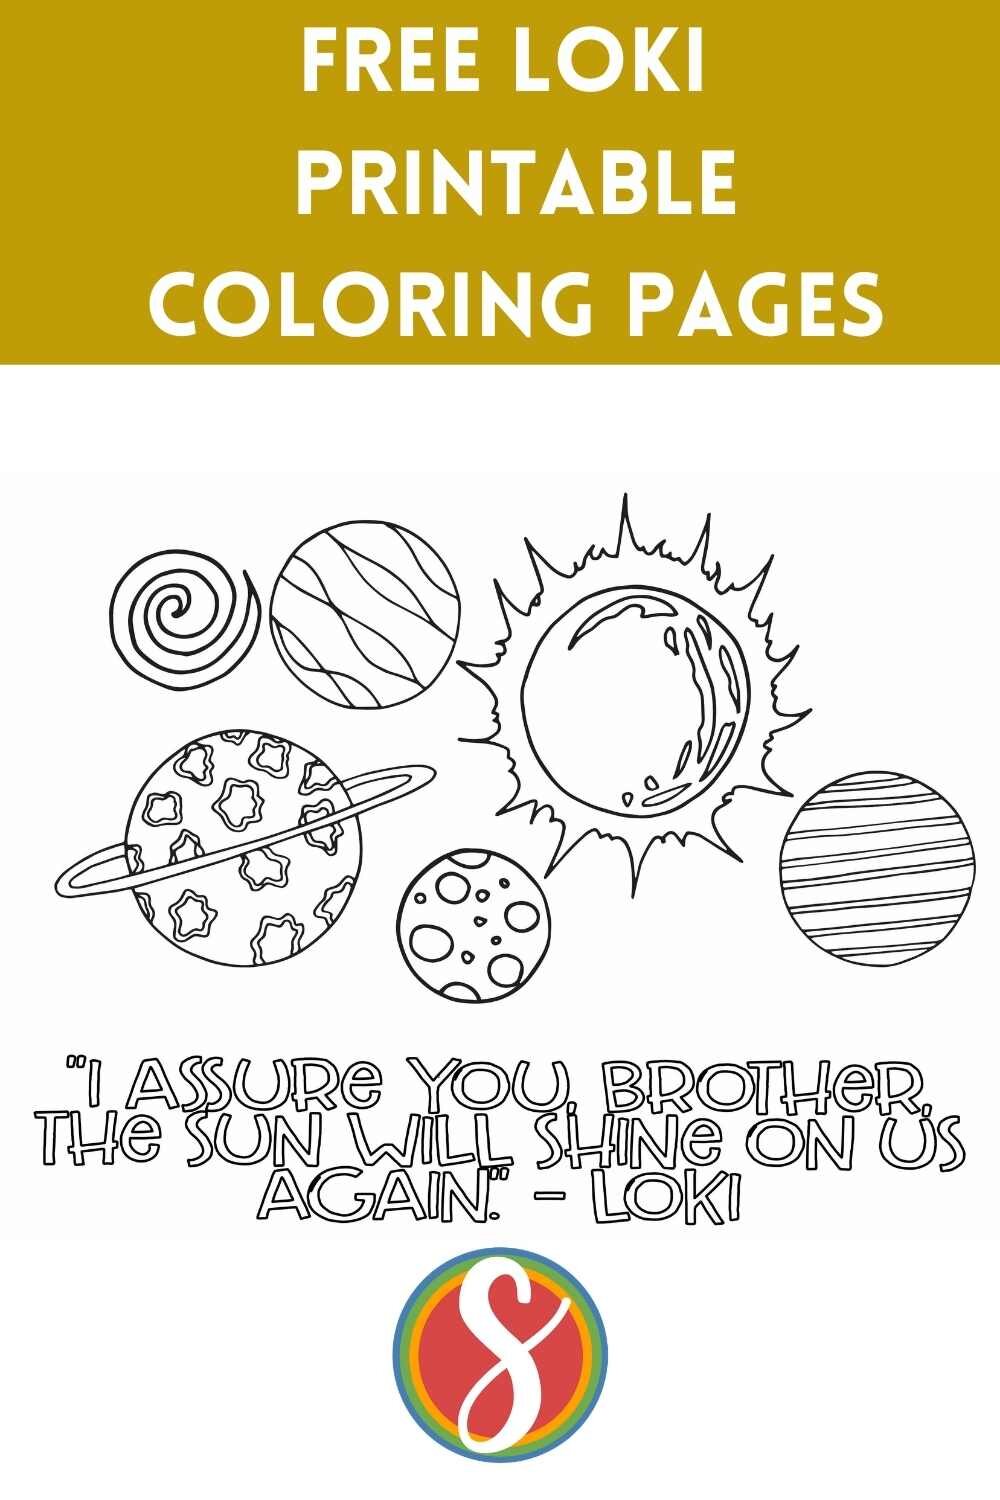 “I assure you, brother, the sun will shine on us again.” free printable Loki coloring pages from Stevie Doodles